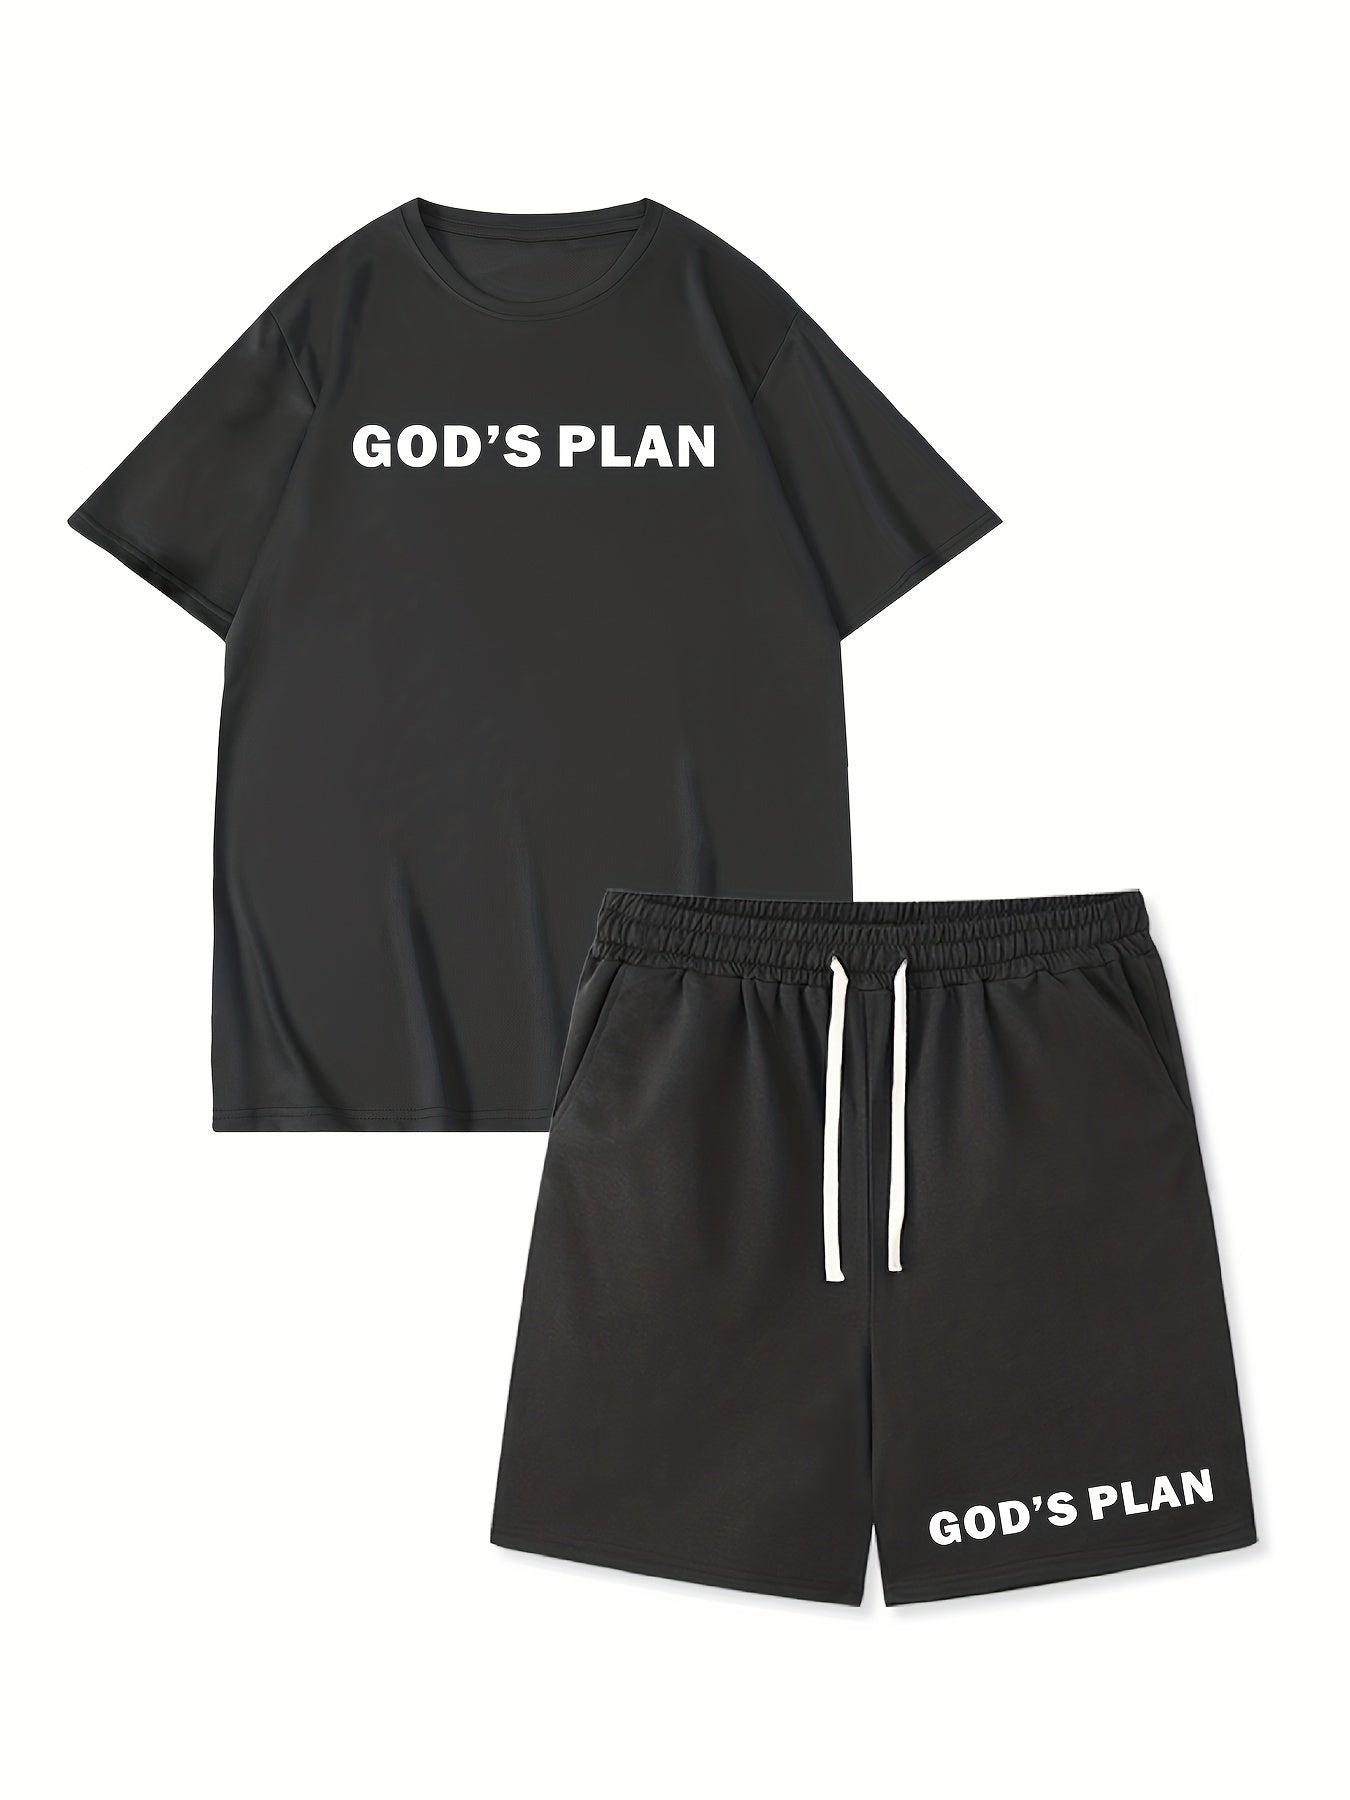 GOD'S PLAN Men's Christian Casual Outfit claimedbygoddesigns